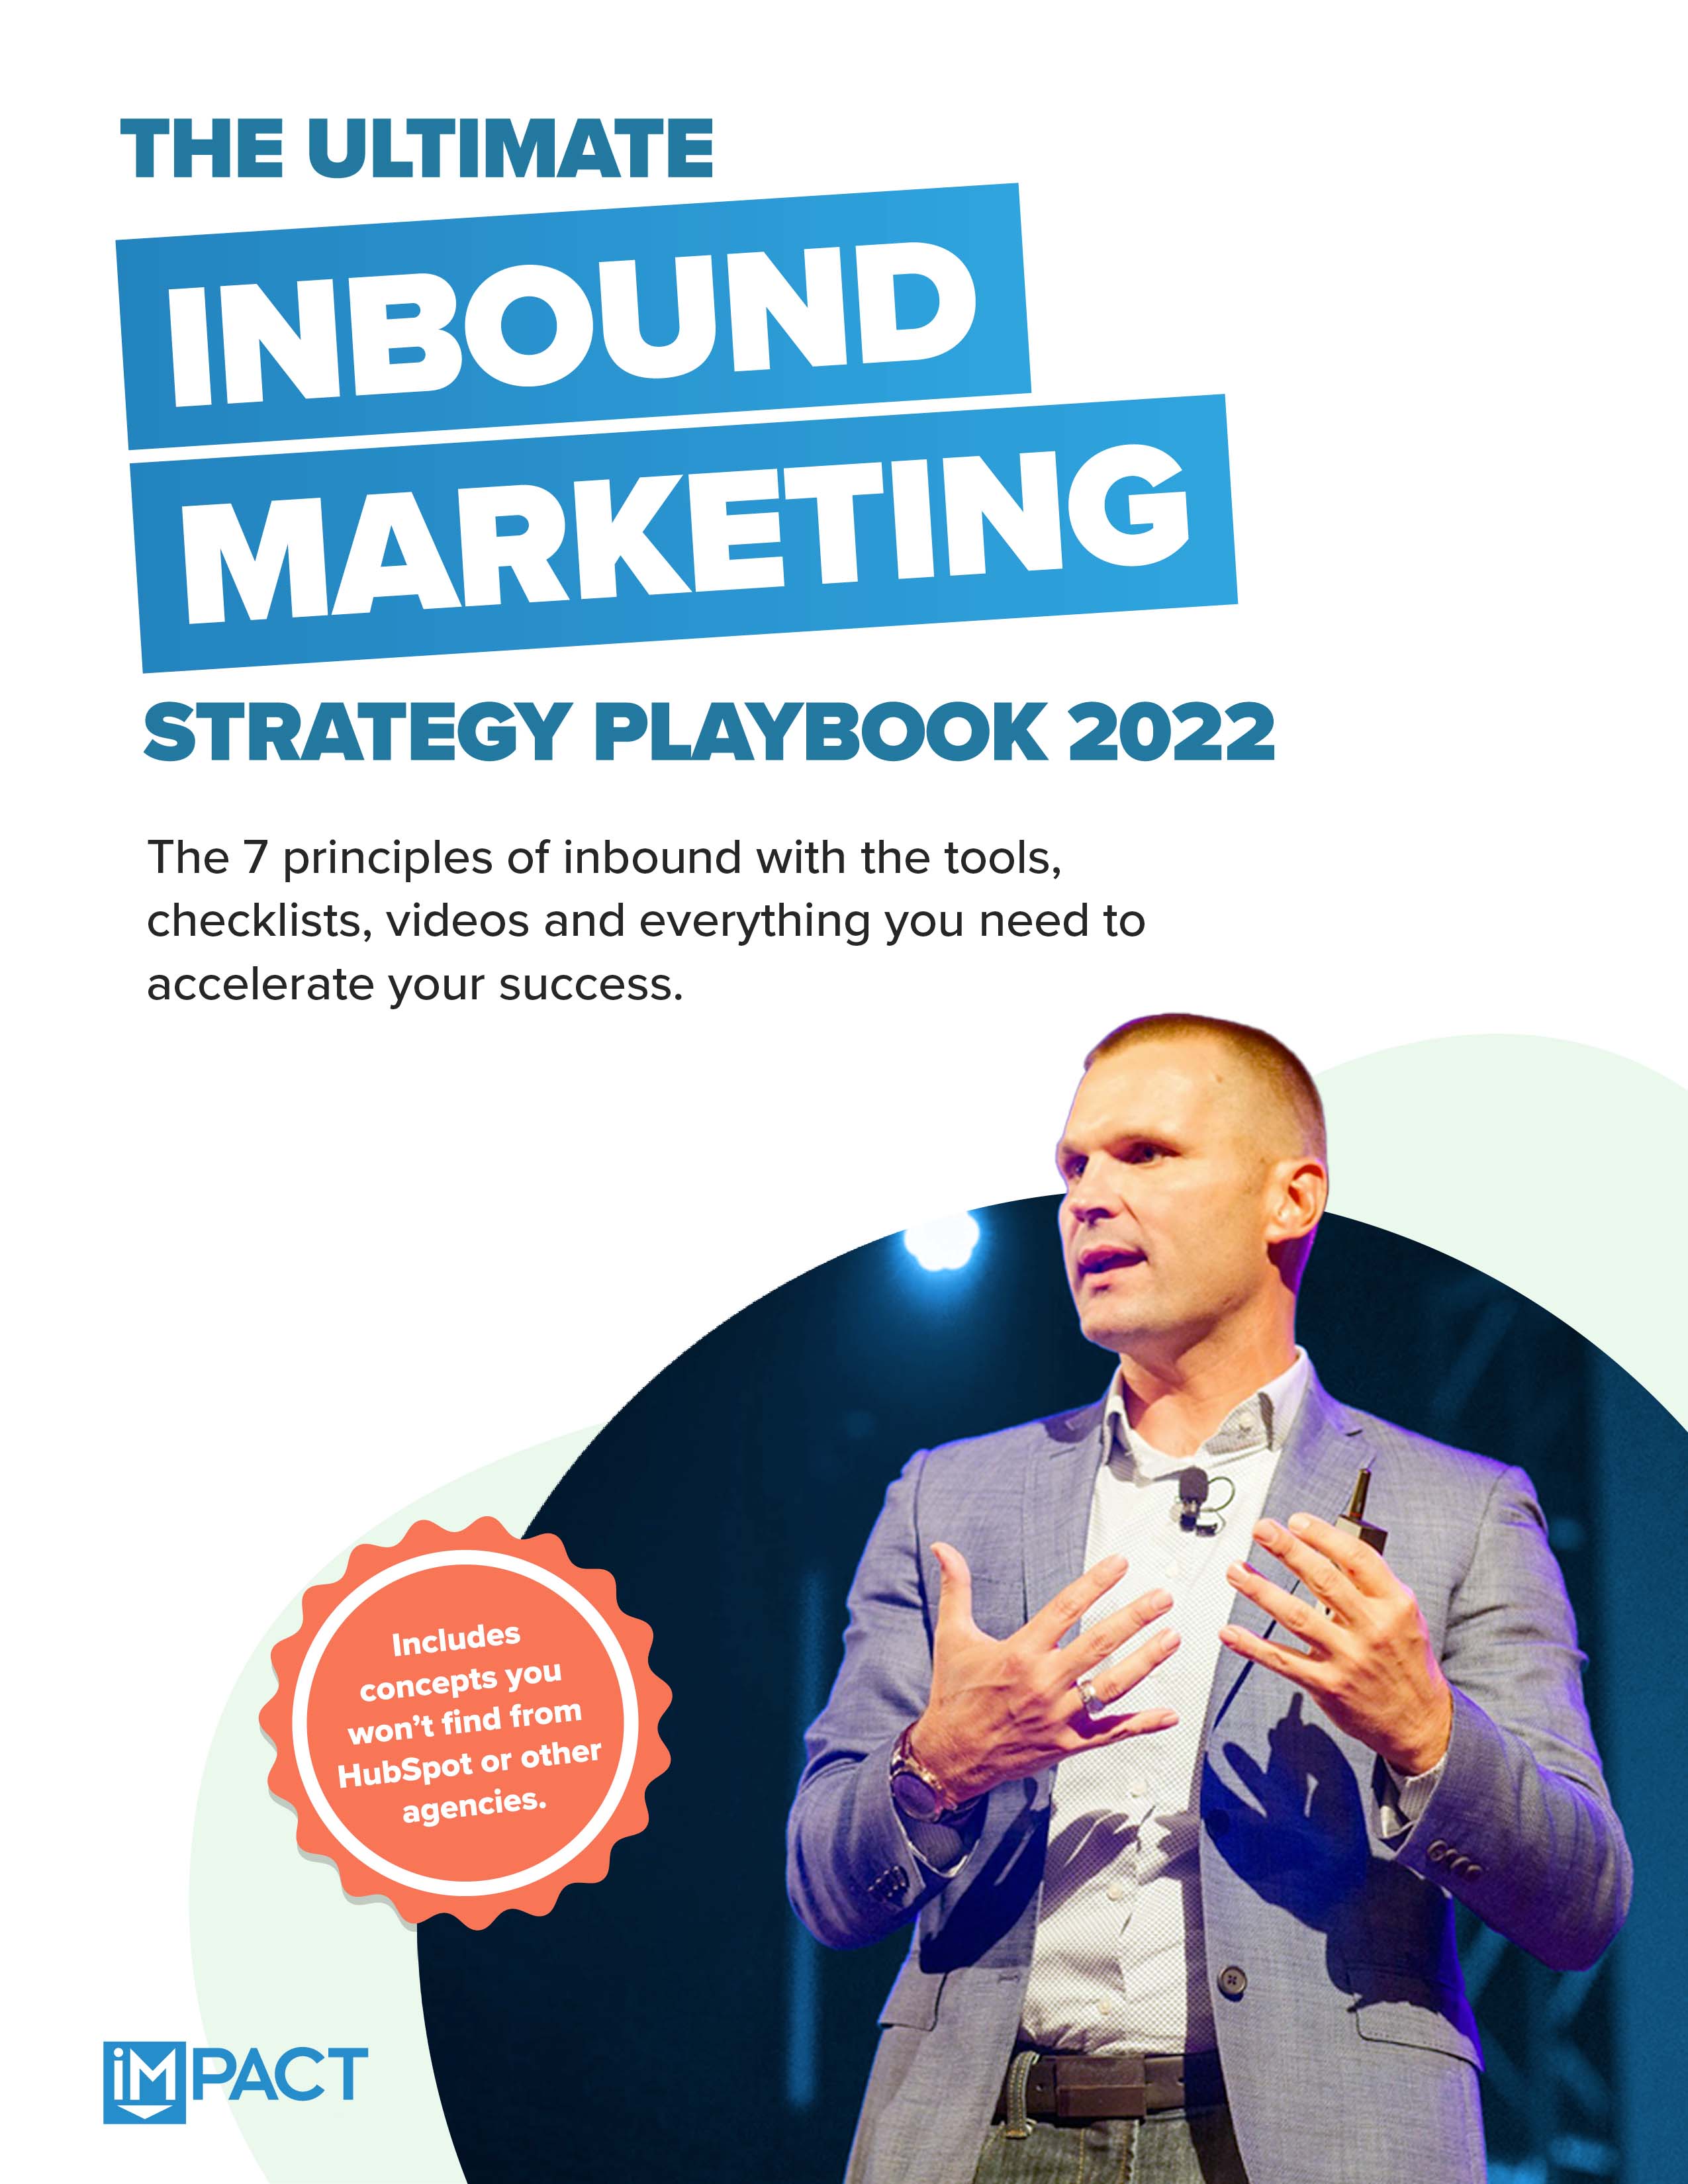 The Ultimate Inbound Marketing Strategy Playbook 2022